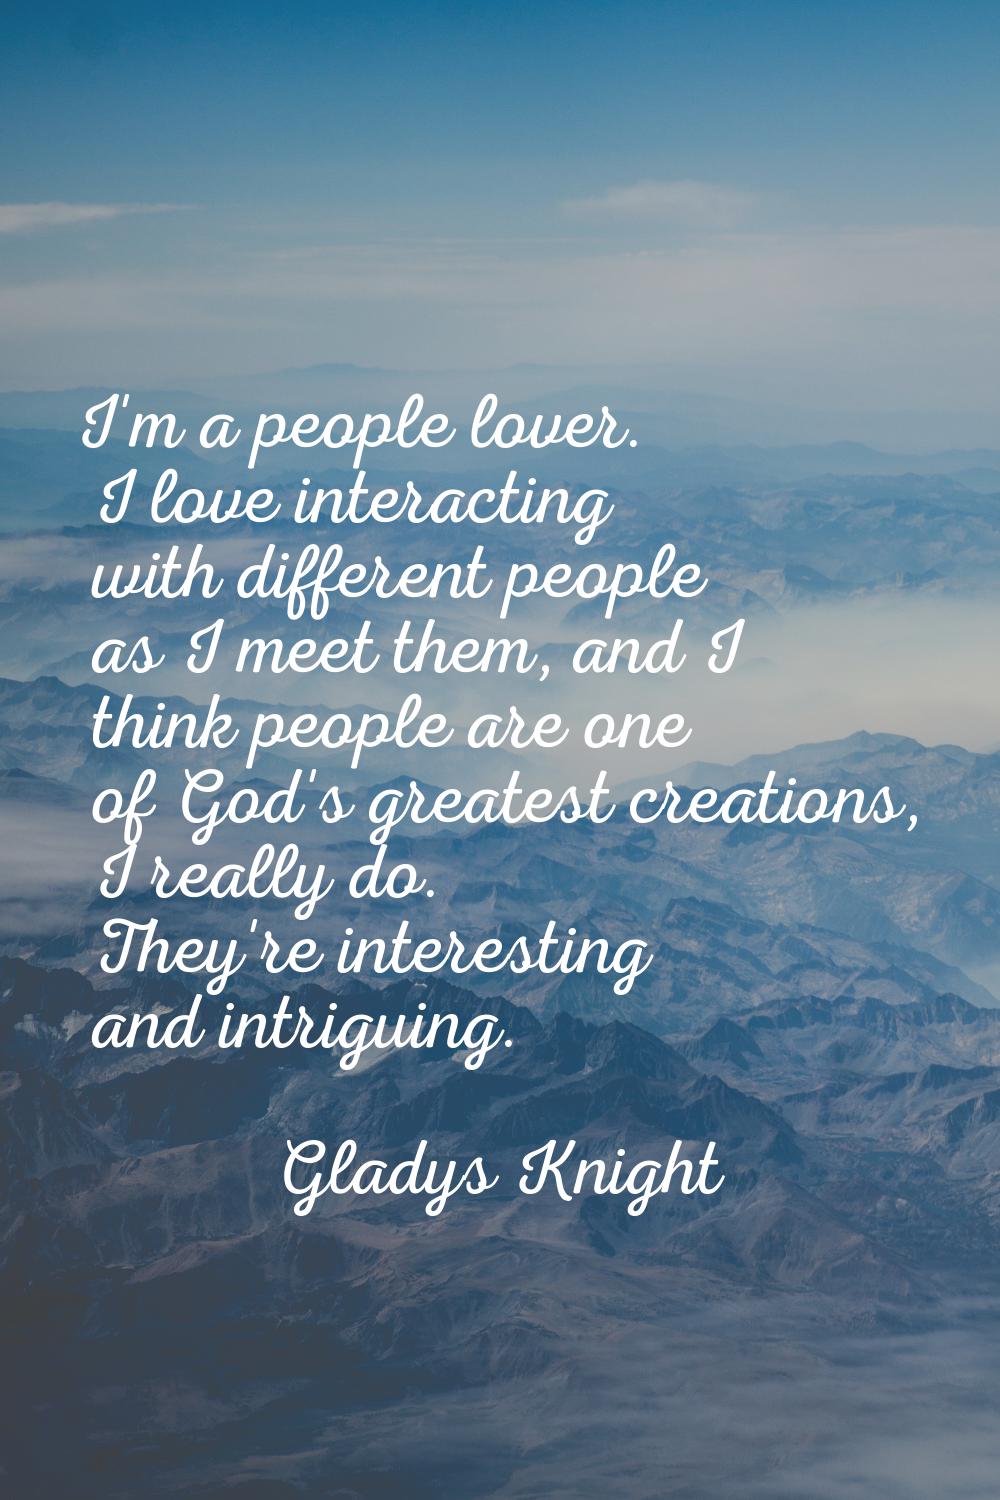 I'm a people lover. I love interacting with different people as I meet them, and I think people are